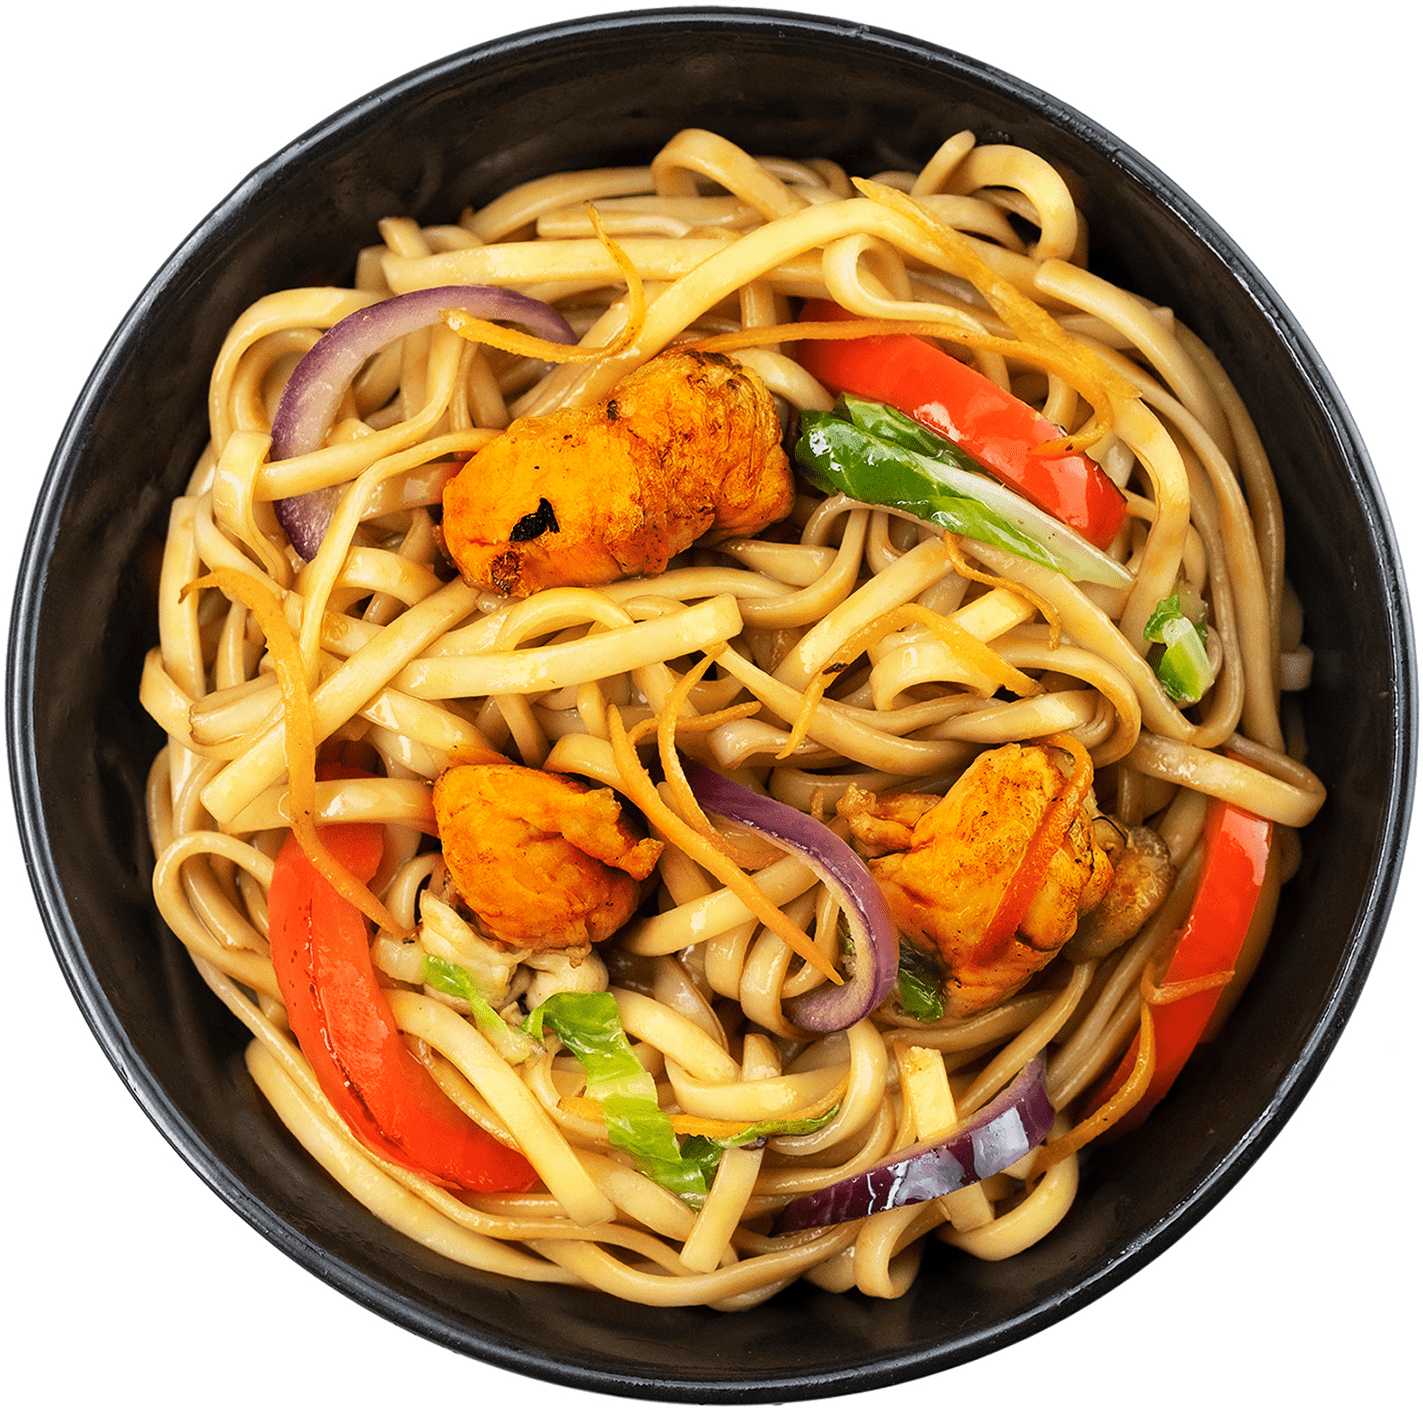  Chicken and Vegetable Lo-Maine Noodles Recipe